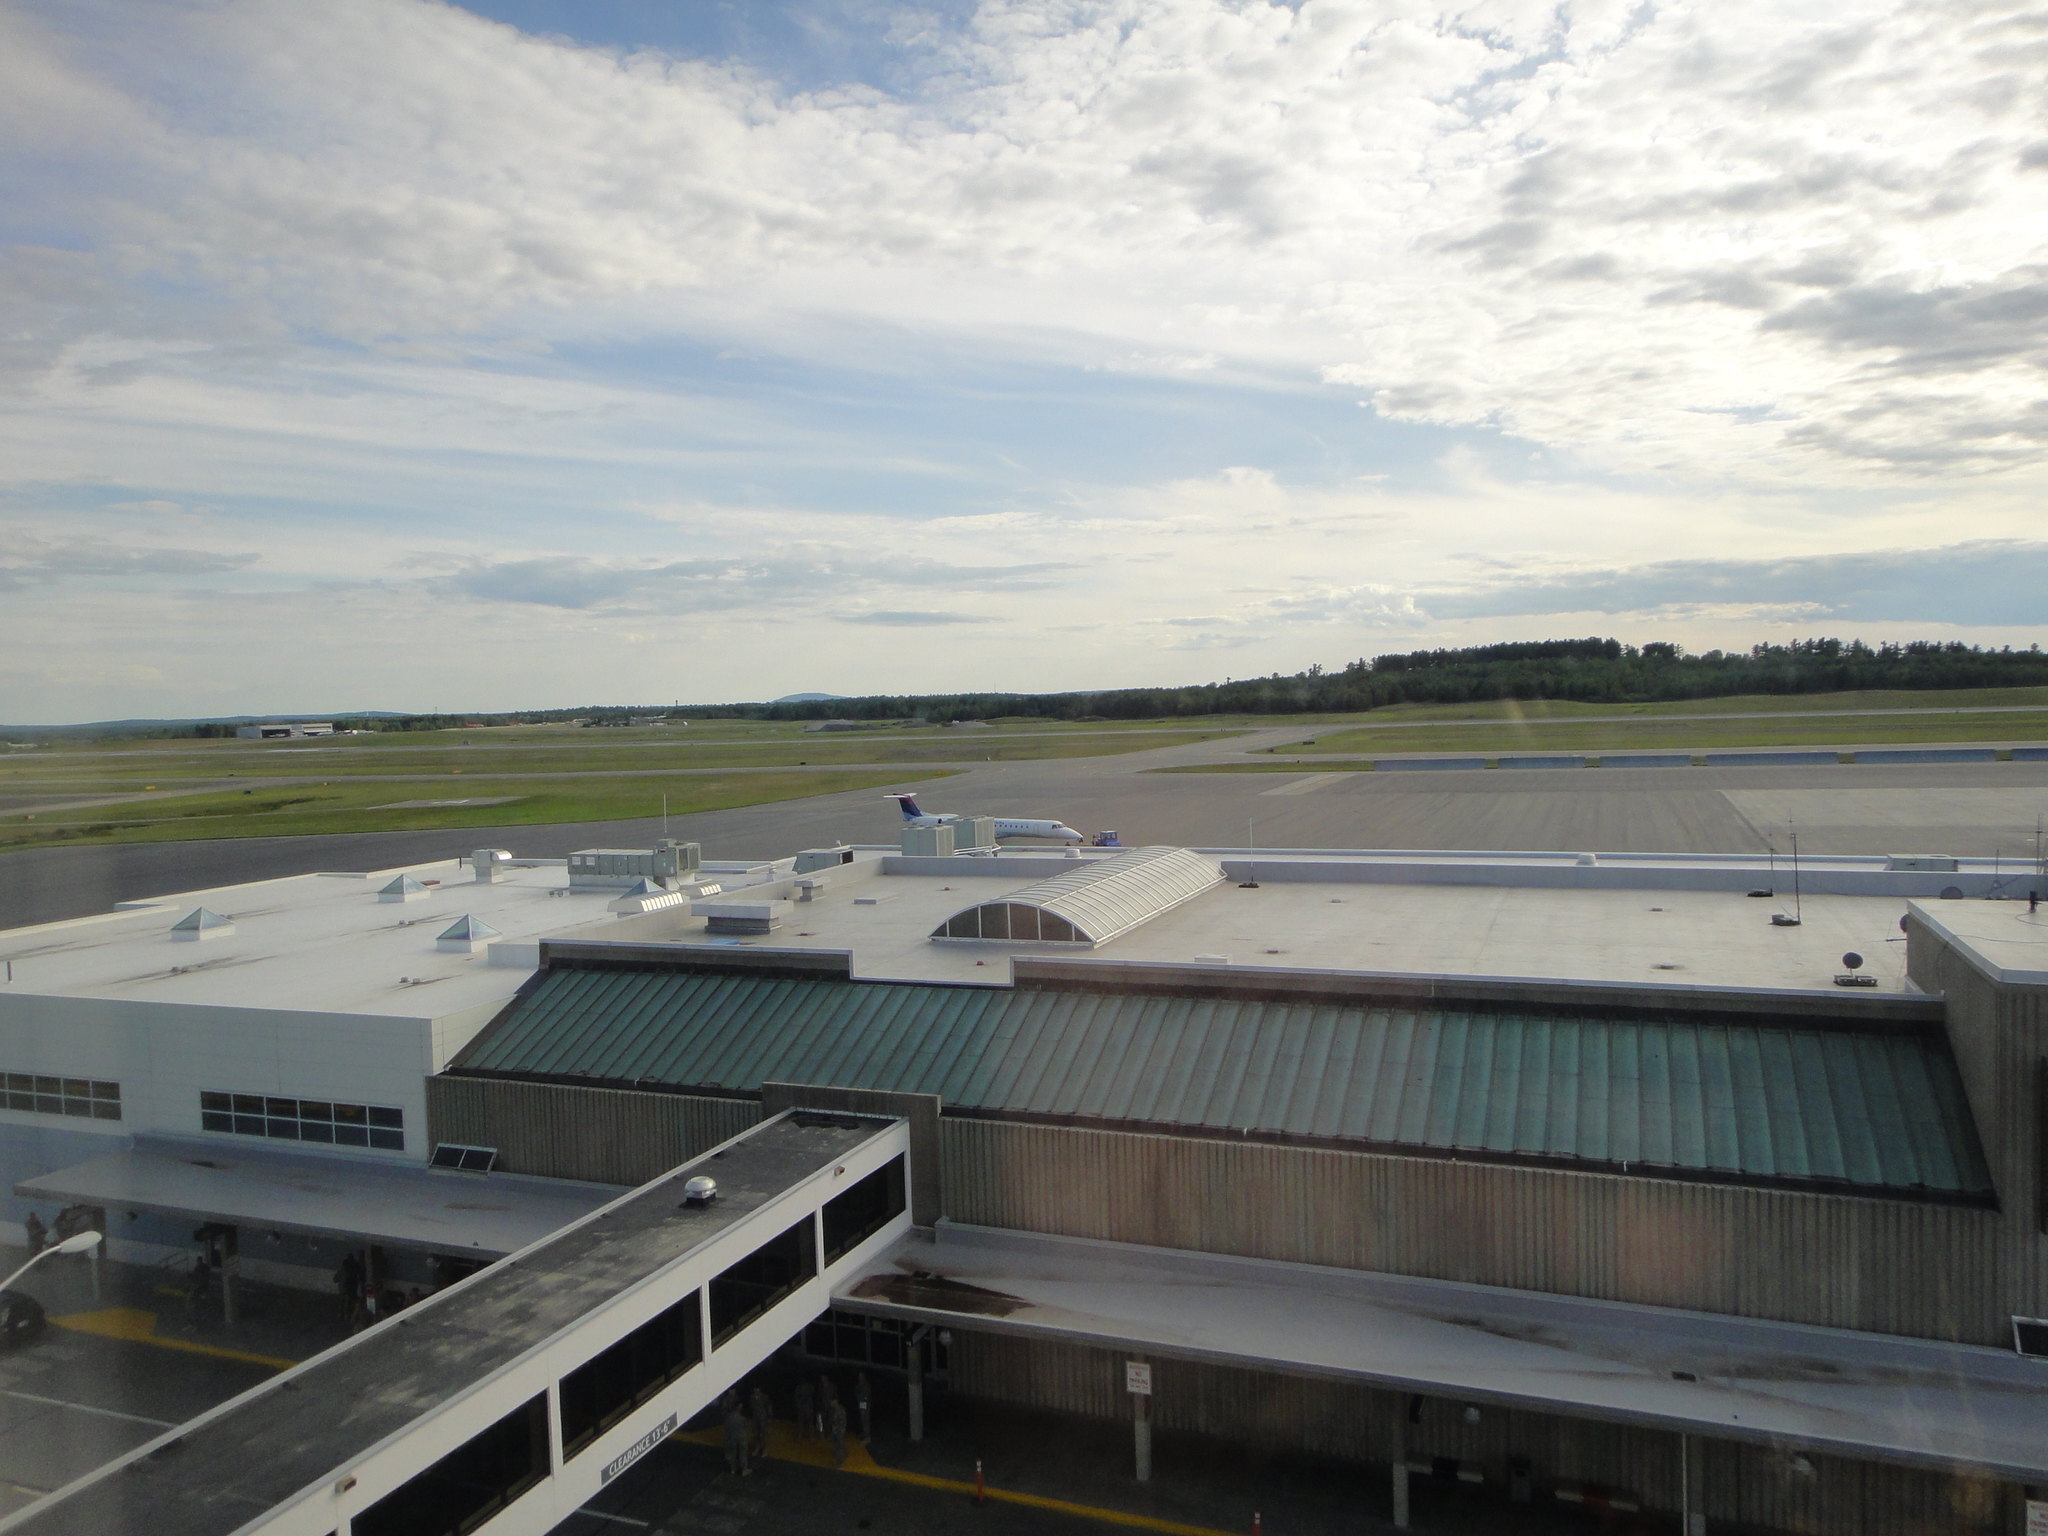 Bangor airport by Tim Rodenberg via Flickr/Creative Commons